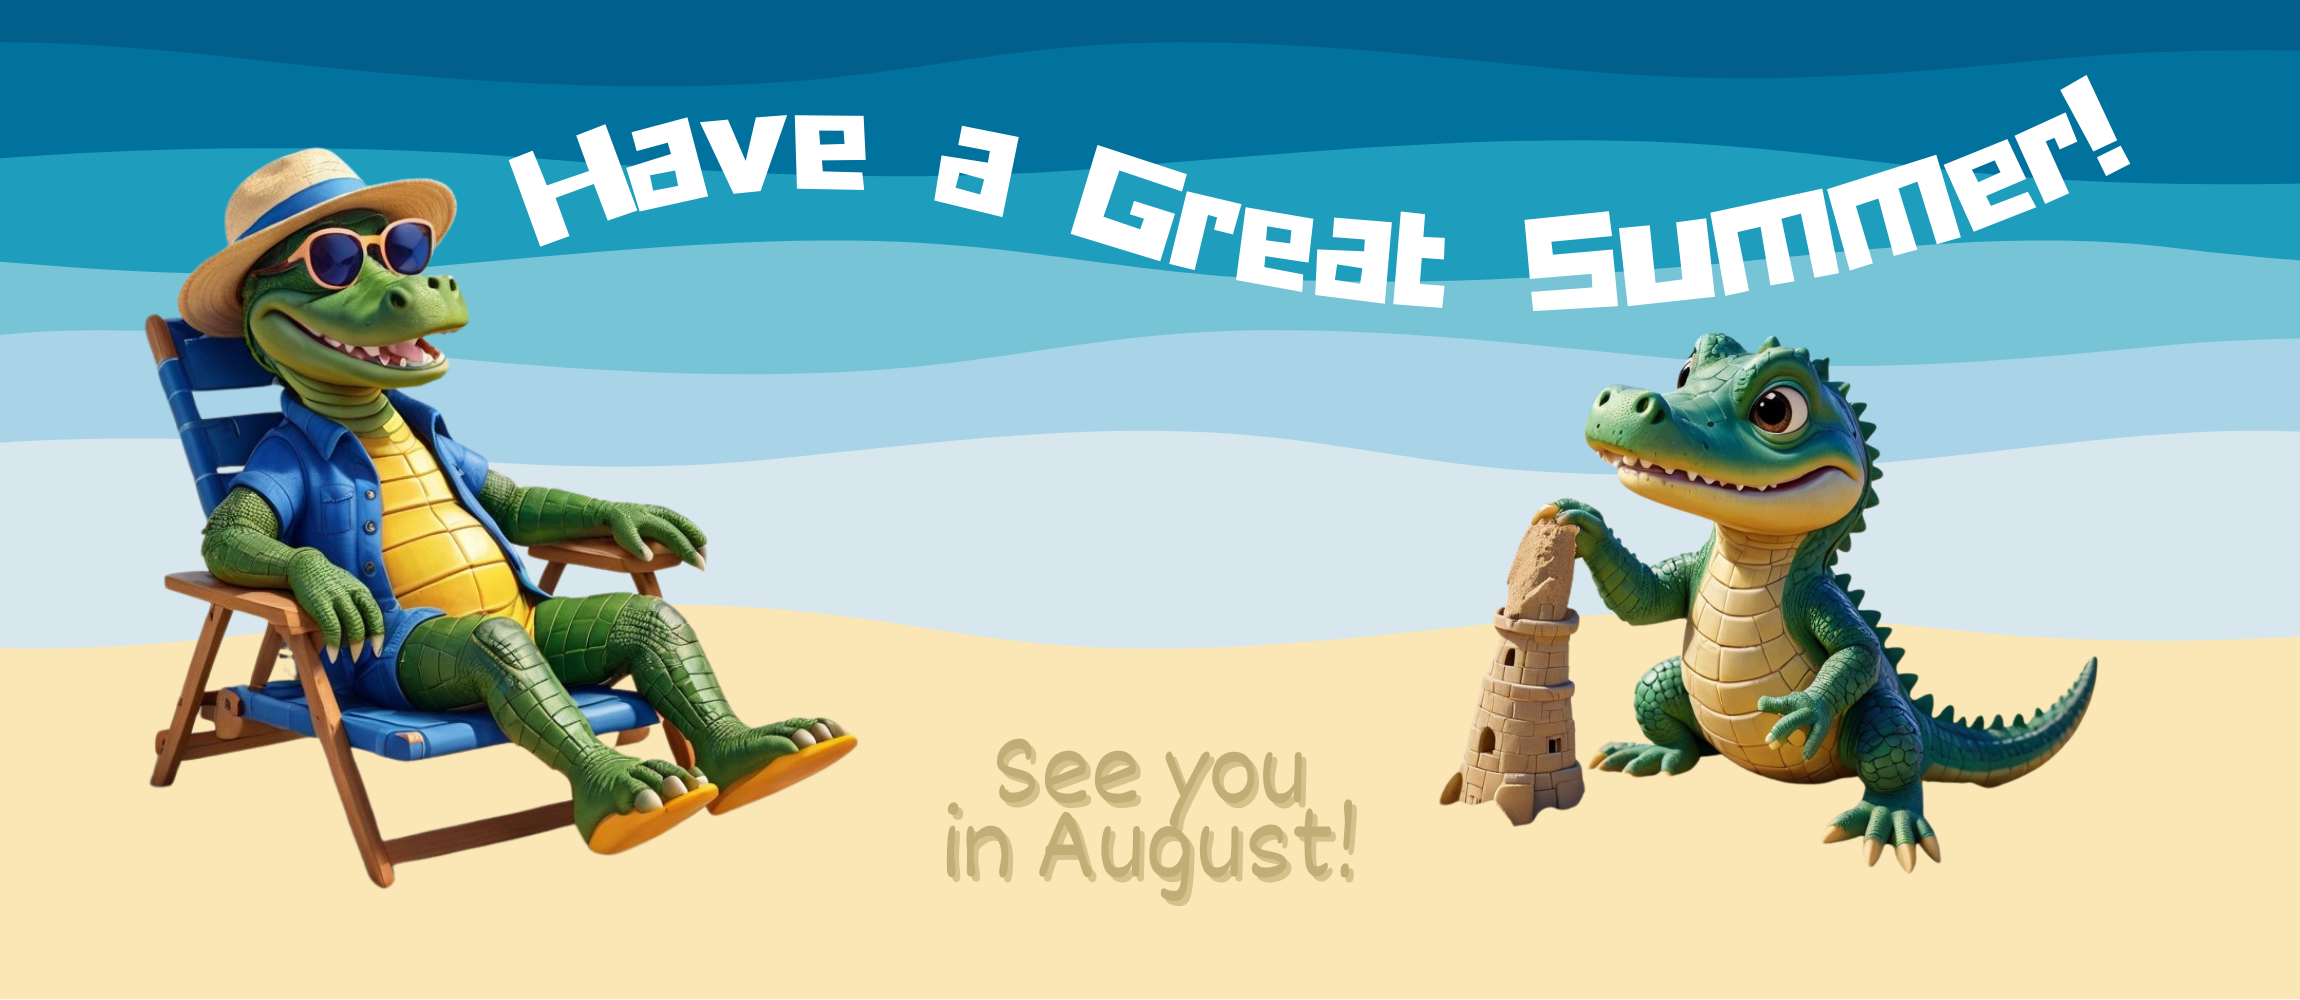 Beach scene with an adult gator sunbathing and a little gator making a sand castle.  The words Have a great Summer can be read above the gators.